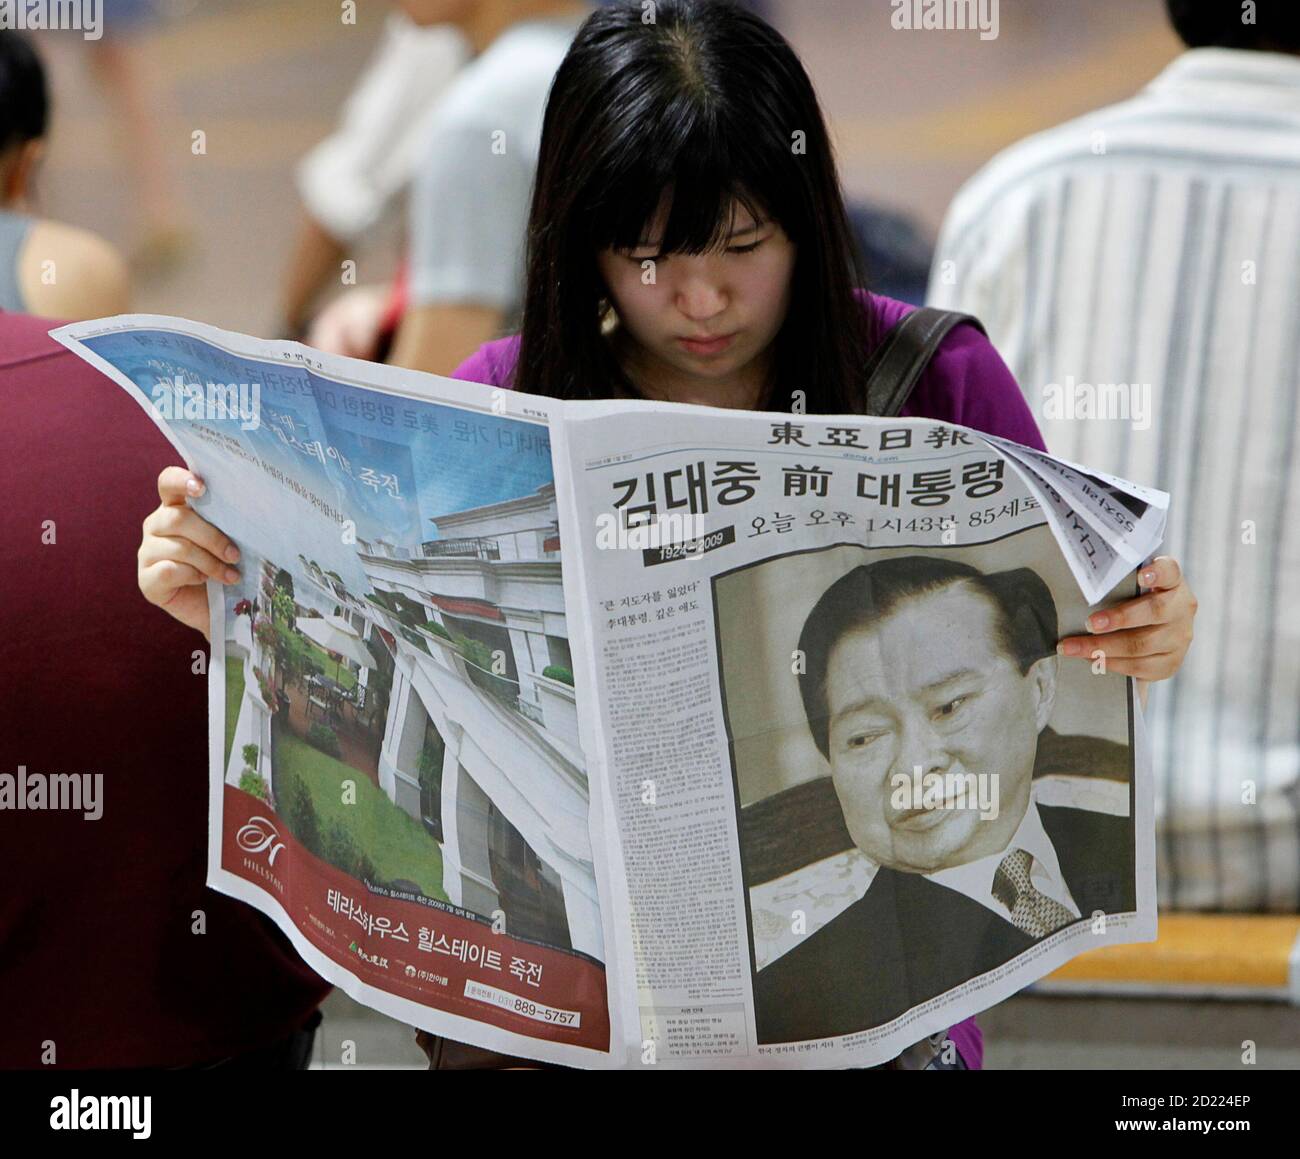 A woman reads an extra edition of a newspaper reporting on former South Korean President Kim Dae-jung's death at the Seoul railway station August 18, 2009. Former South Korean President Kim, a towering figure in South Korea's struggle for democracy who won the 2000 Nobel Peace Prize for seeking rapprochement with the communist North, died on Tuesday at the age of 85. An official at a Seoul hospital treating Kim for pneumonia confirmed the death.  REUTERS/Jo Yong-Hak (SOUTH KOREA POLITICS OBITUARY) Stock Photo